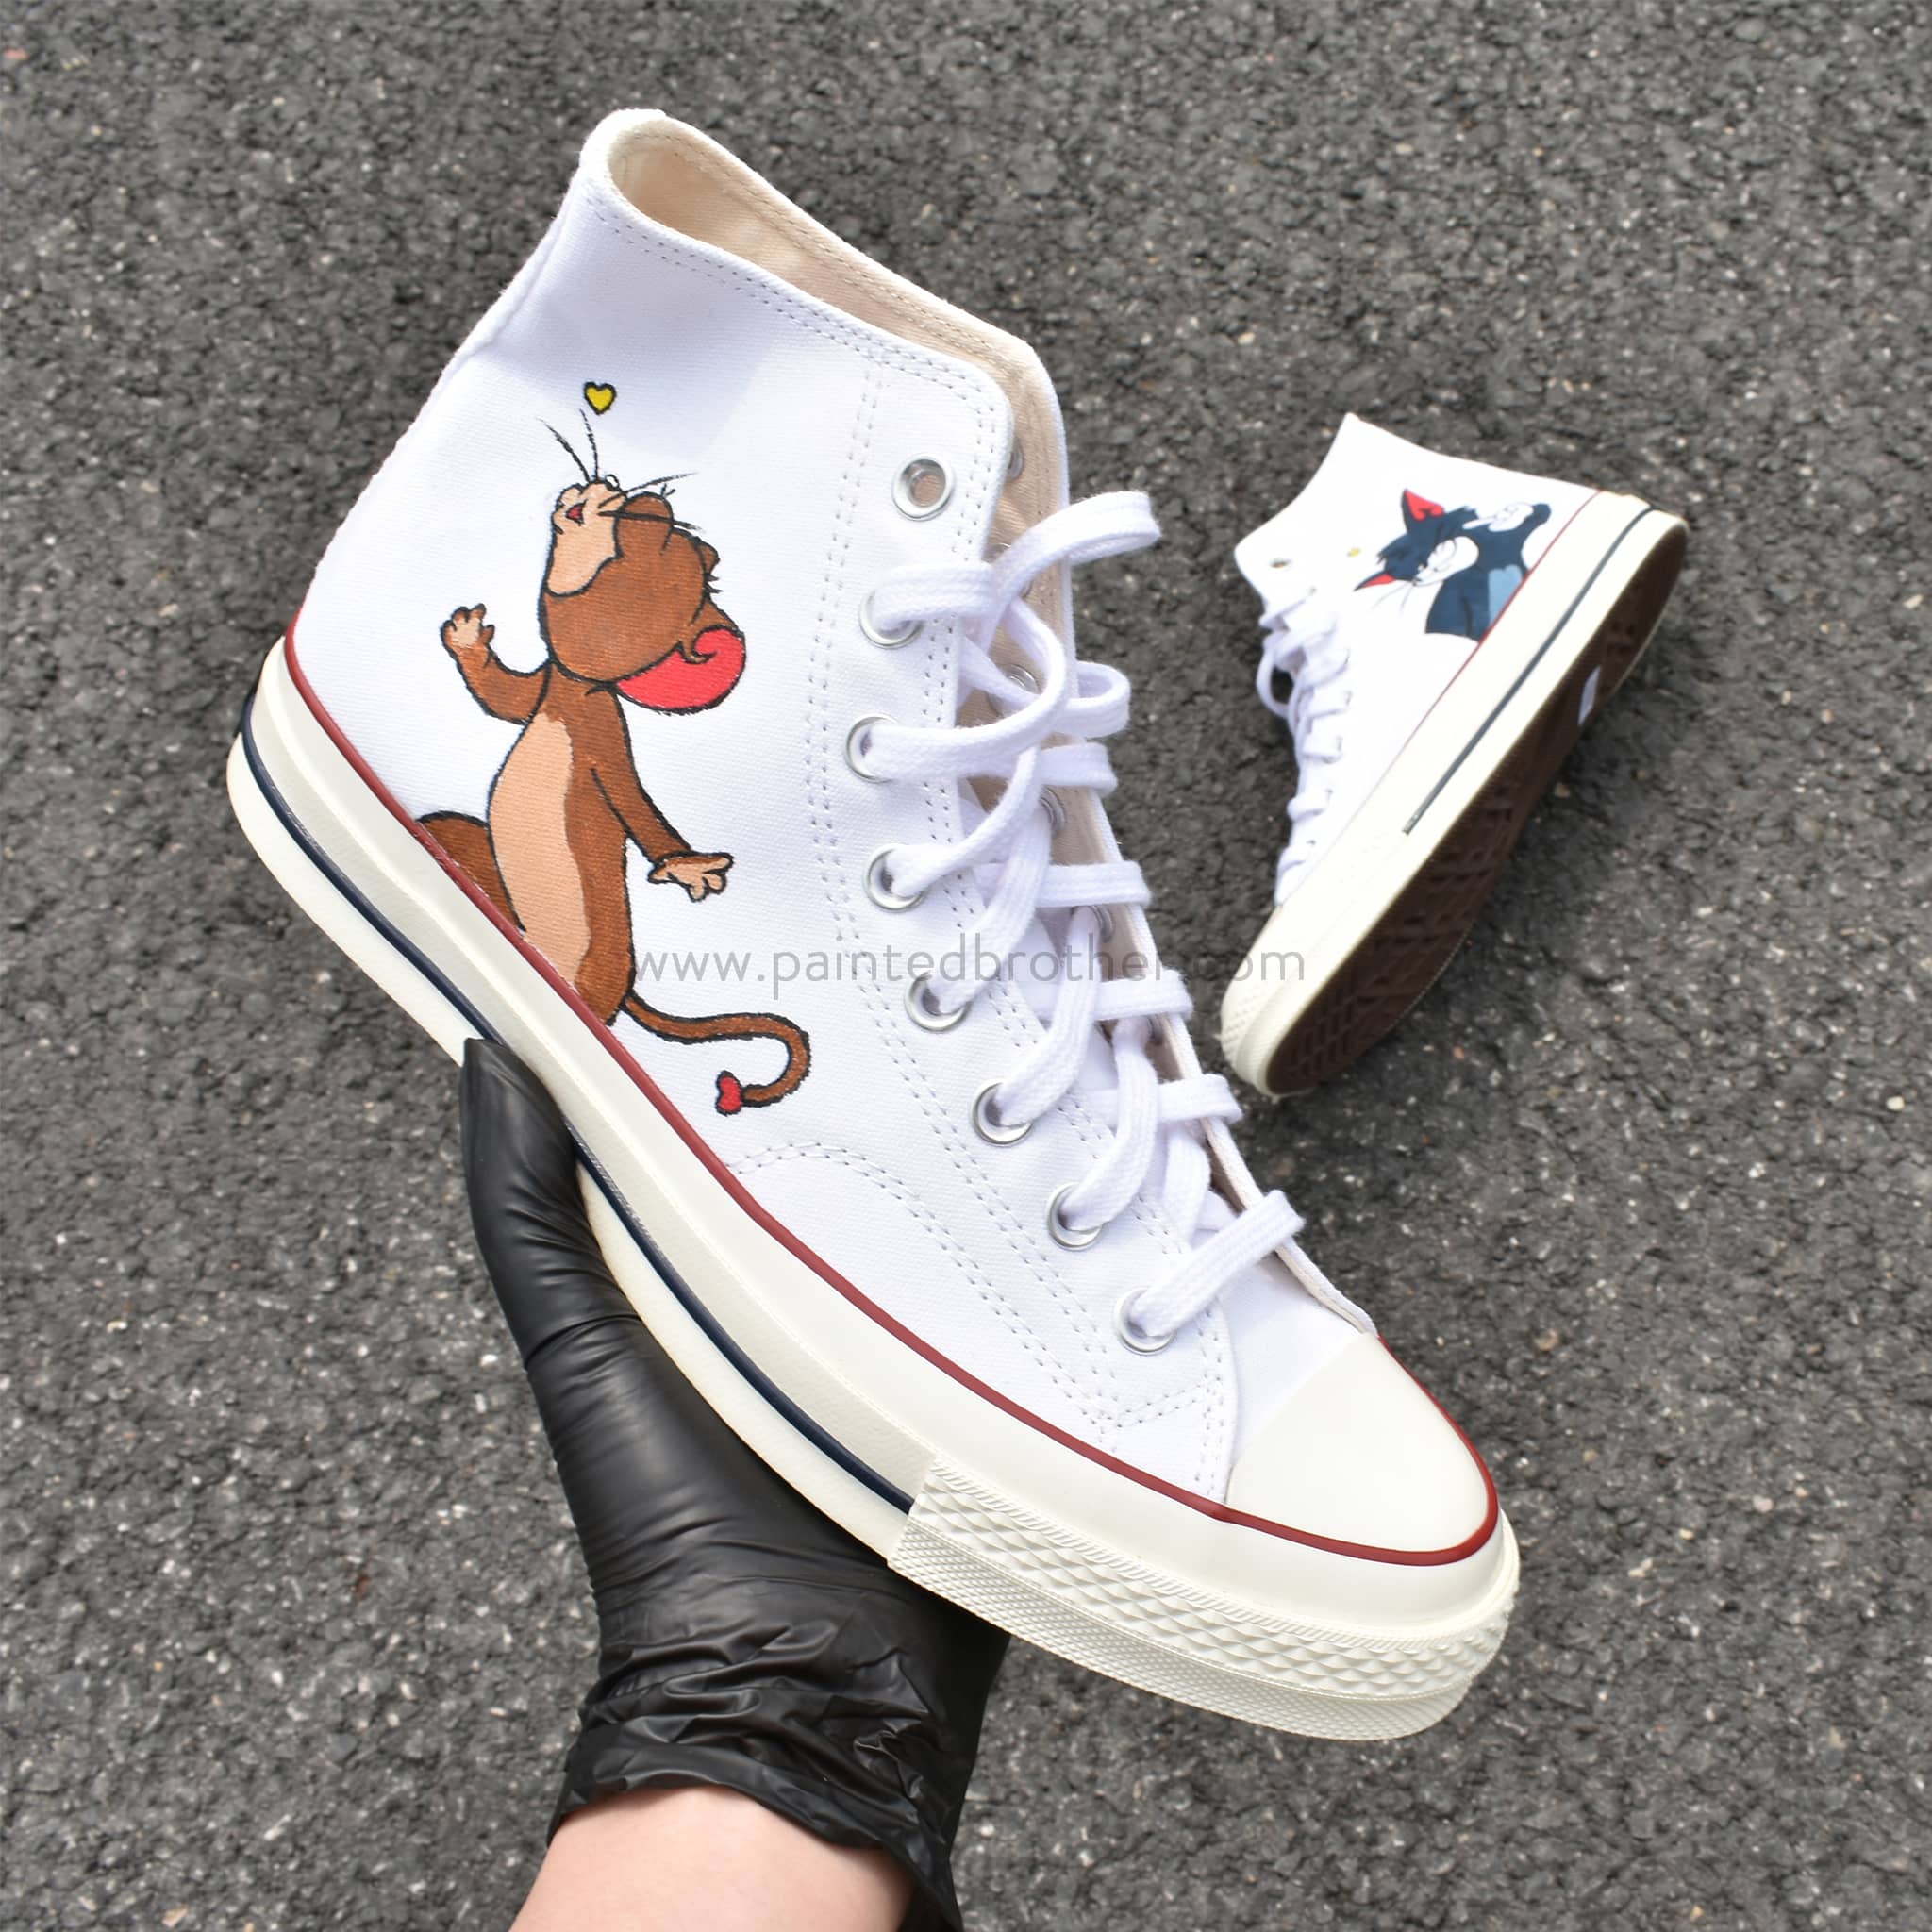 Tom and Jerry Handcraft Painting Shoes Converse High top